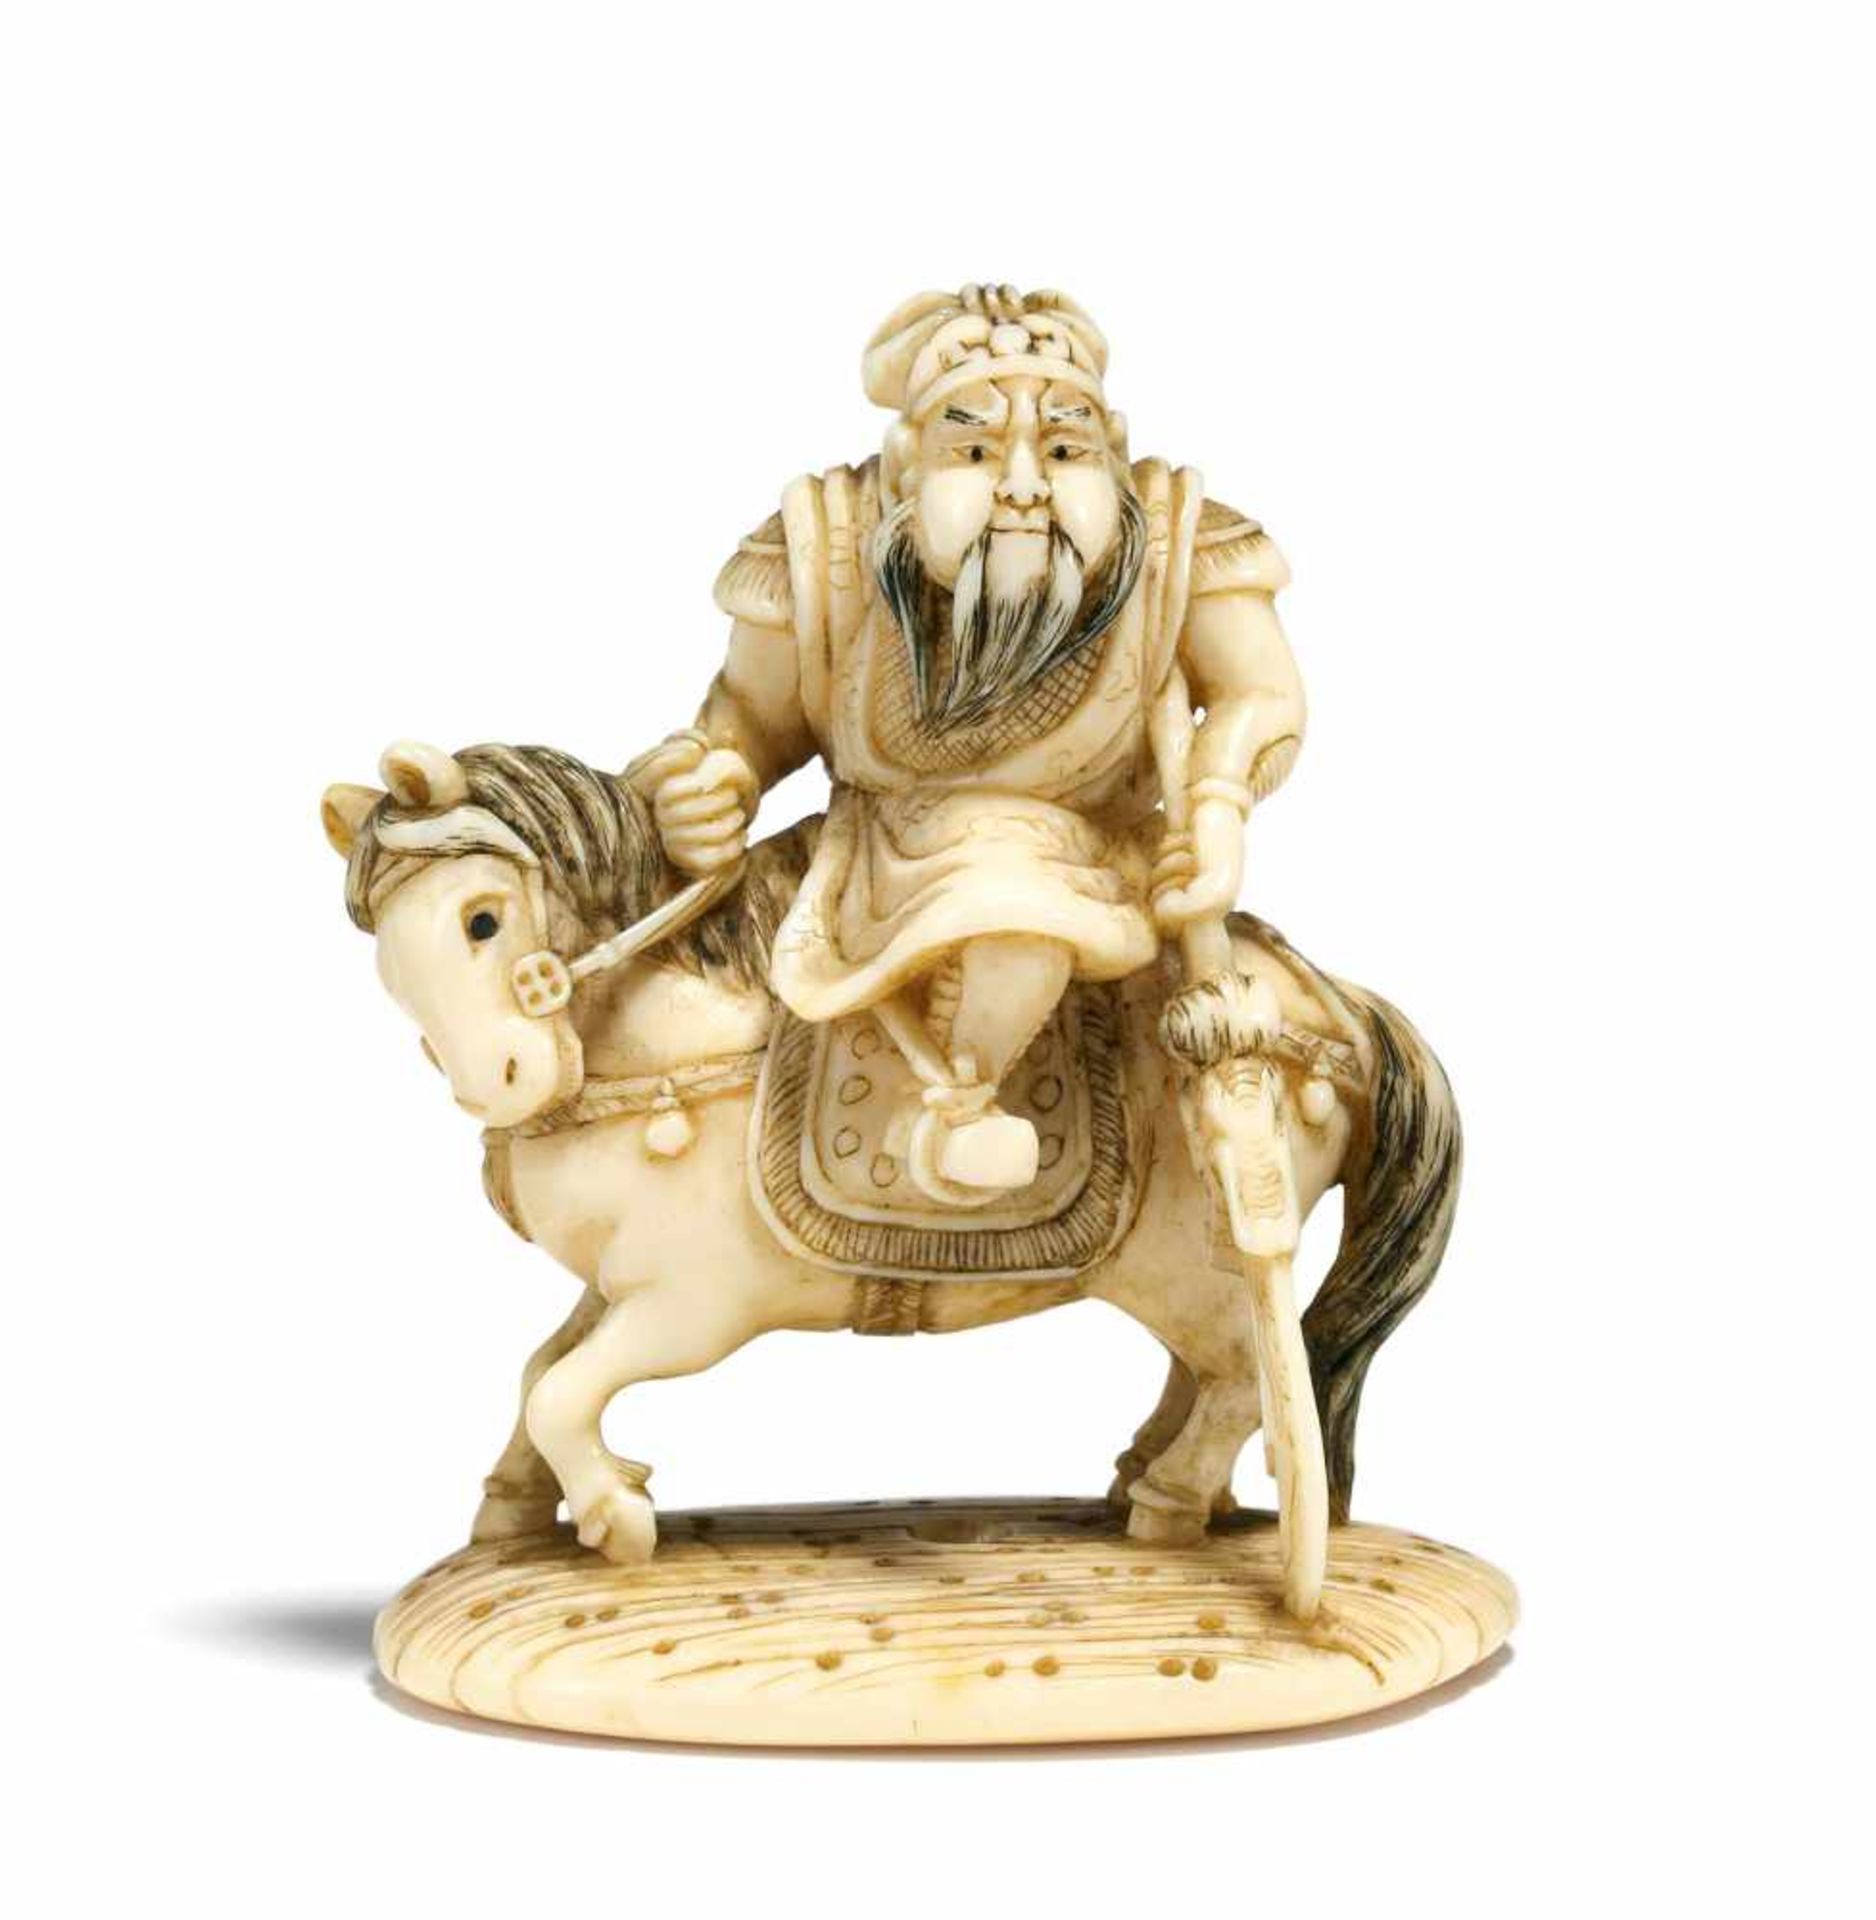 NETSUKE: KAN'U WITH HIS HALBERD 'GREEN DRAGON' RIDING A HORSE. Japan. 19th c. Ivory finely carved